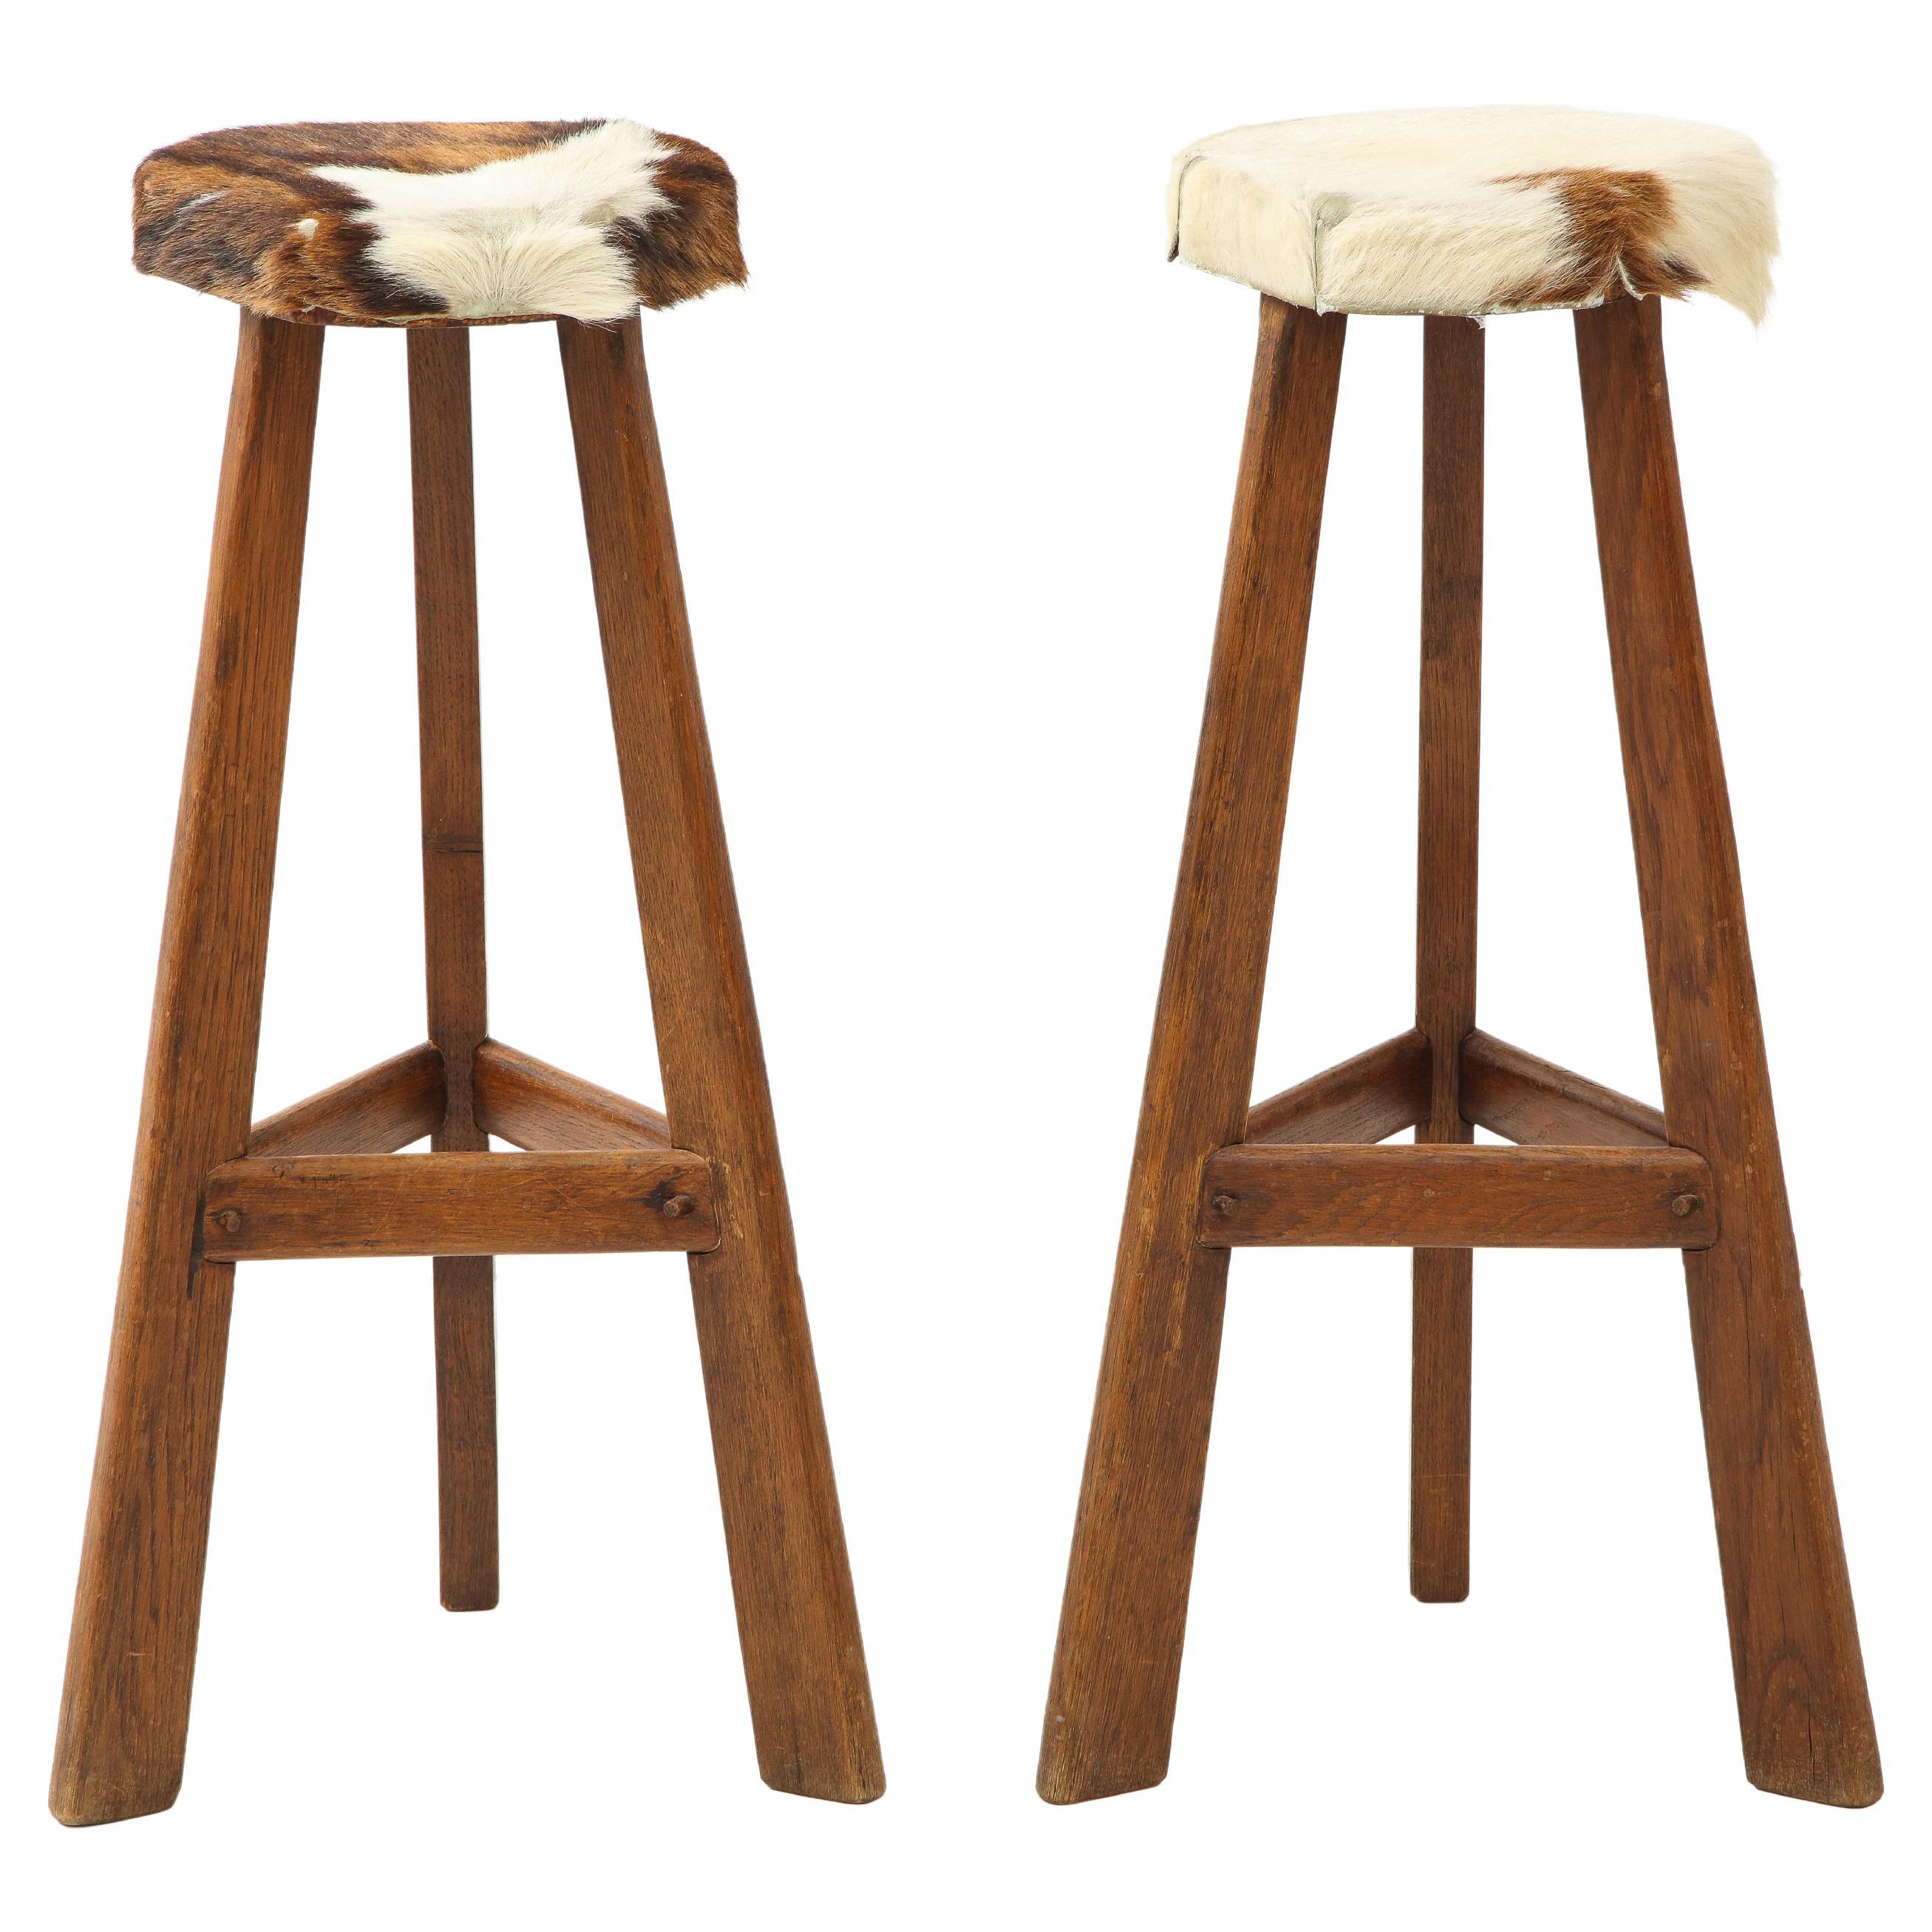 Pair of Midcentury Stools with Cowhide Seats, France, circa 1960